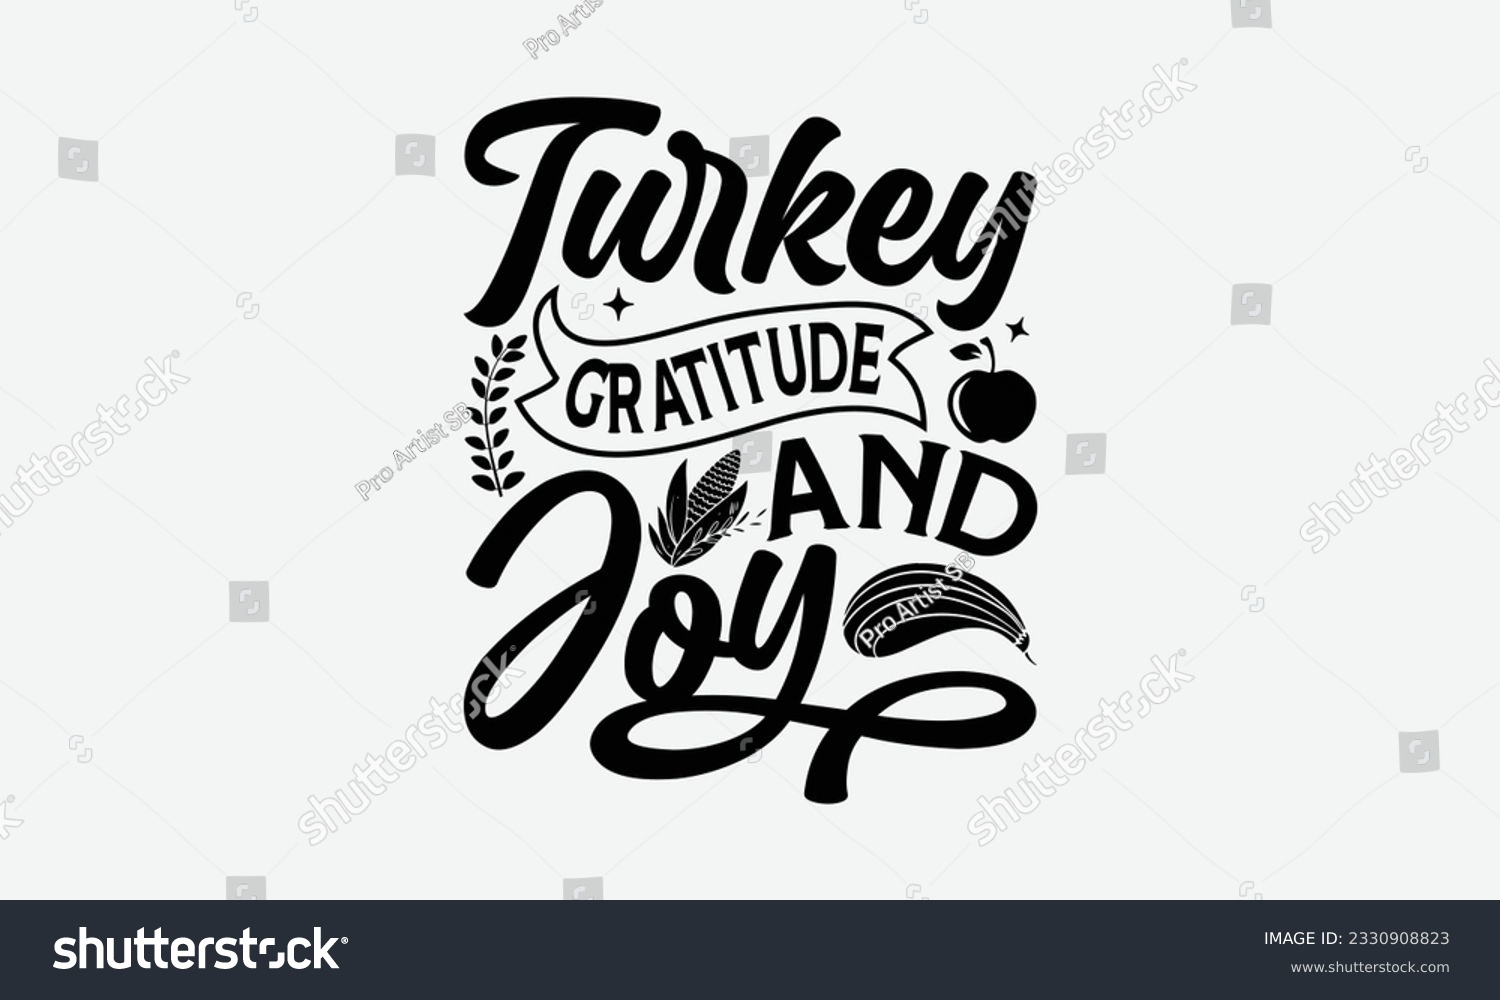 SVG of Turkey Gratitude And Joy - Thanksgiving T-shirt Design Template, Thanksgiving Quotes File, Hand Drawn Lettering Phrase, SVG Files for Cutting Cricut and Silhouette. svg